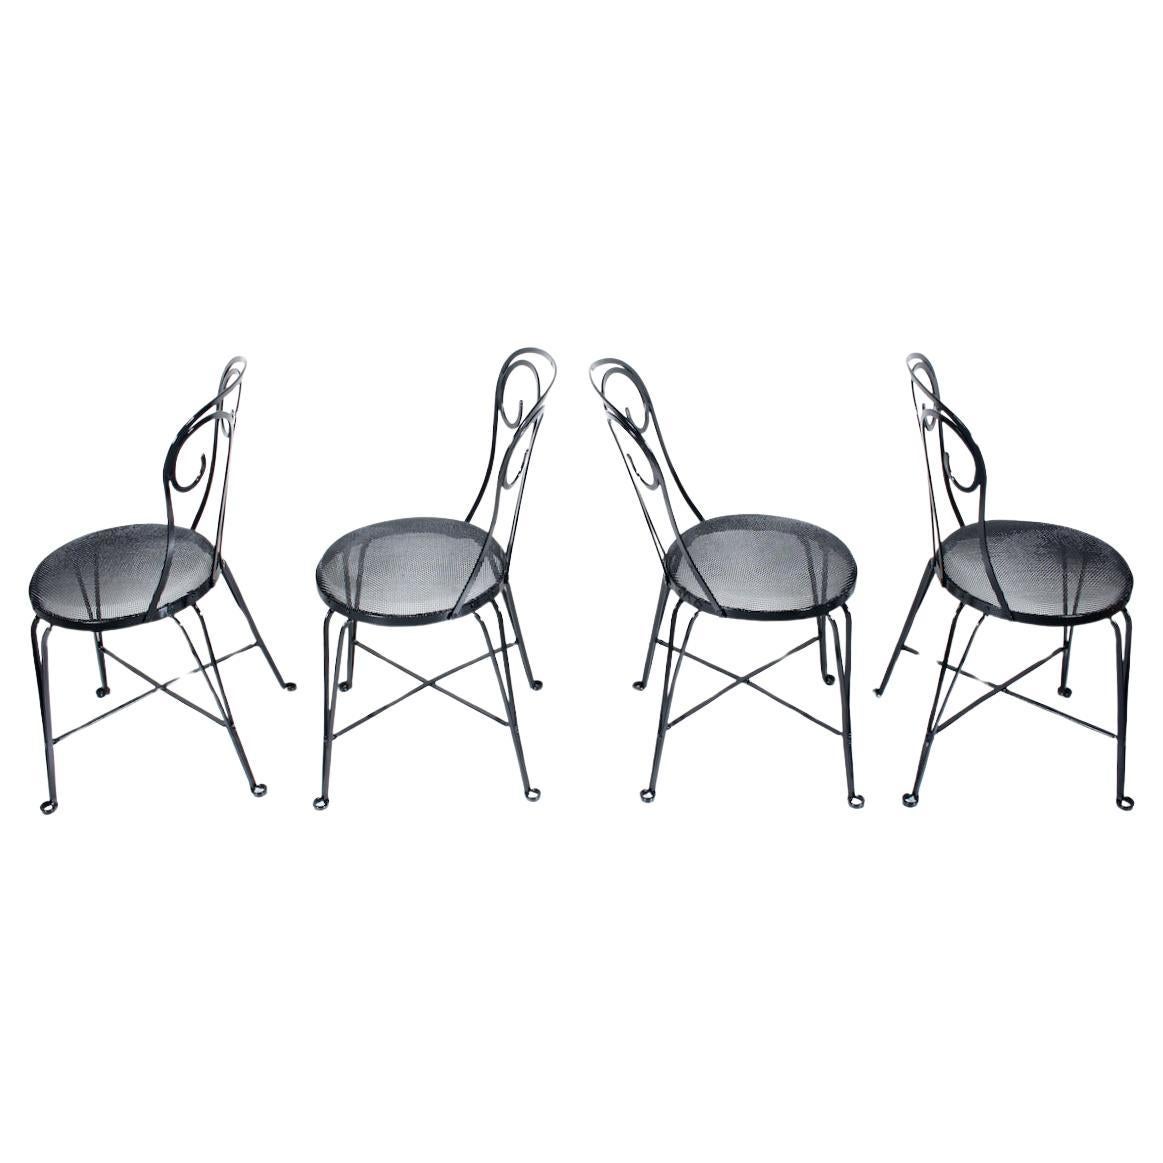 Set of 4 Art Deco Black Enamel Iron Conservatory Cafe Bistro Dining Chairs.  Featuring a hand crafted Black enameled Wrought Iron framework, criss cross support, rounded Fleur de Lis back, comfortable 14